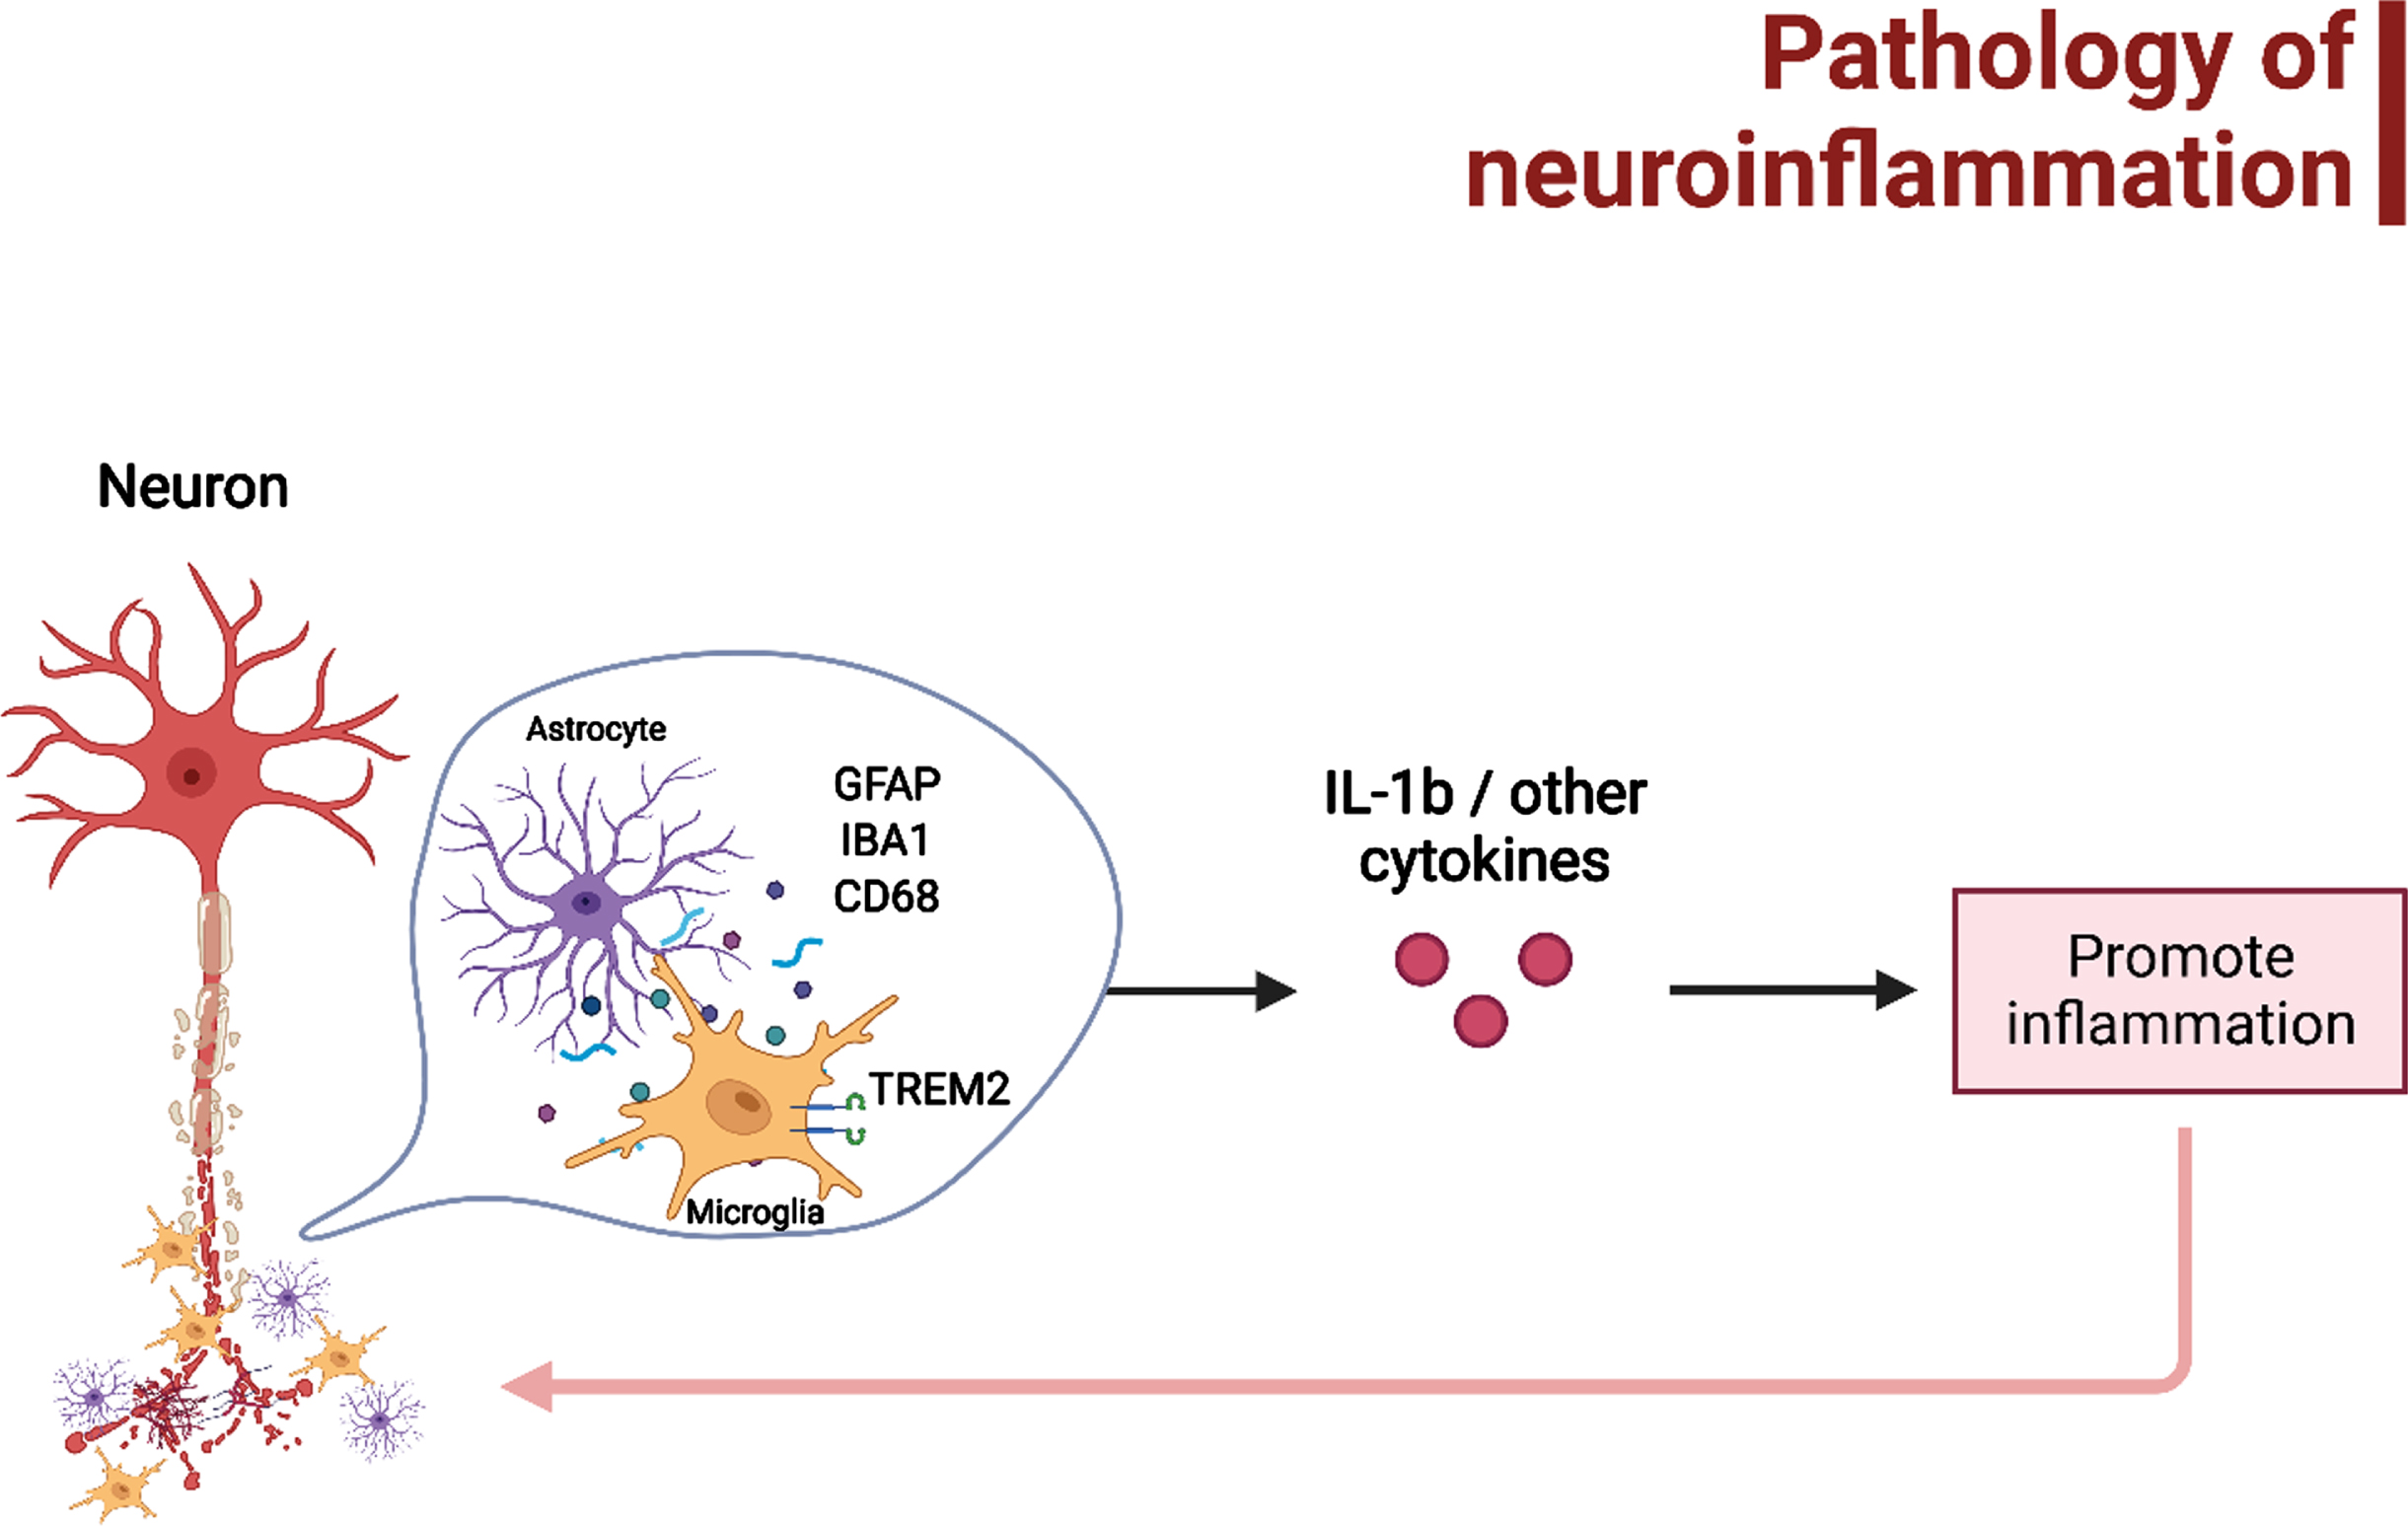 The possible pathology of neuroinflammation that may lead to AD and/or AD-associated epileptogenesis, which have been mainly related to microgliosis and astrogliosis. Figure was created in BioRender.com.